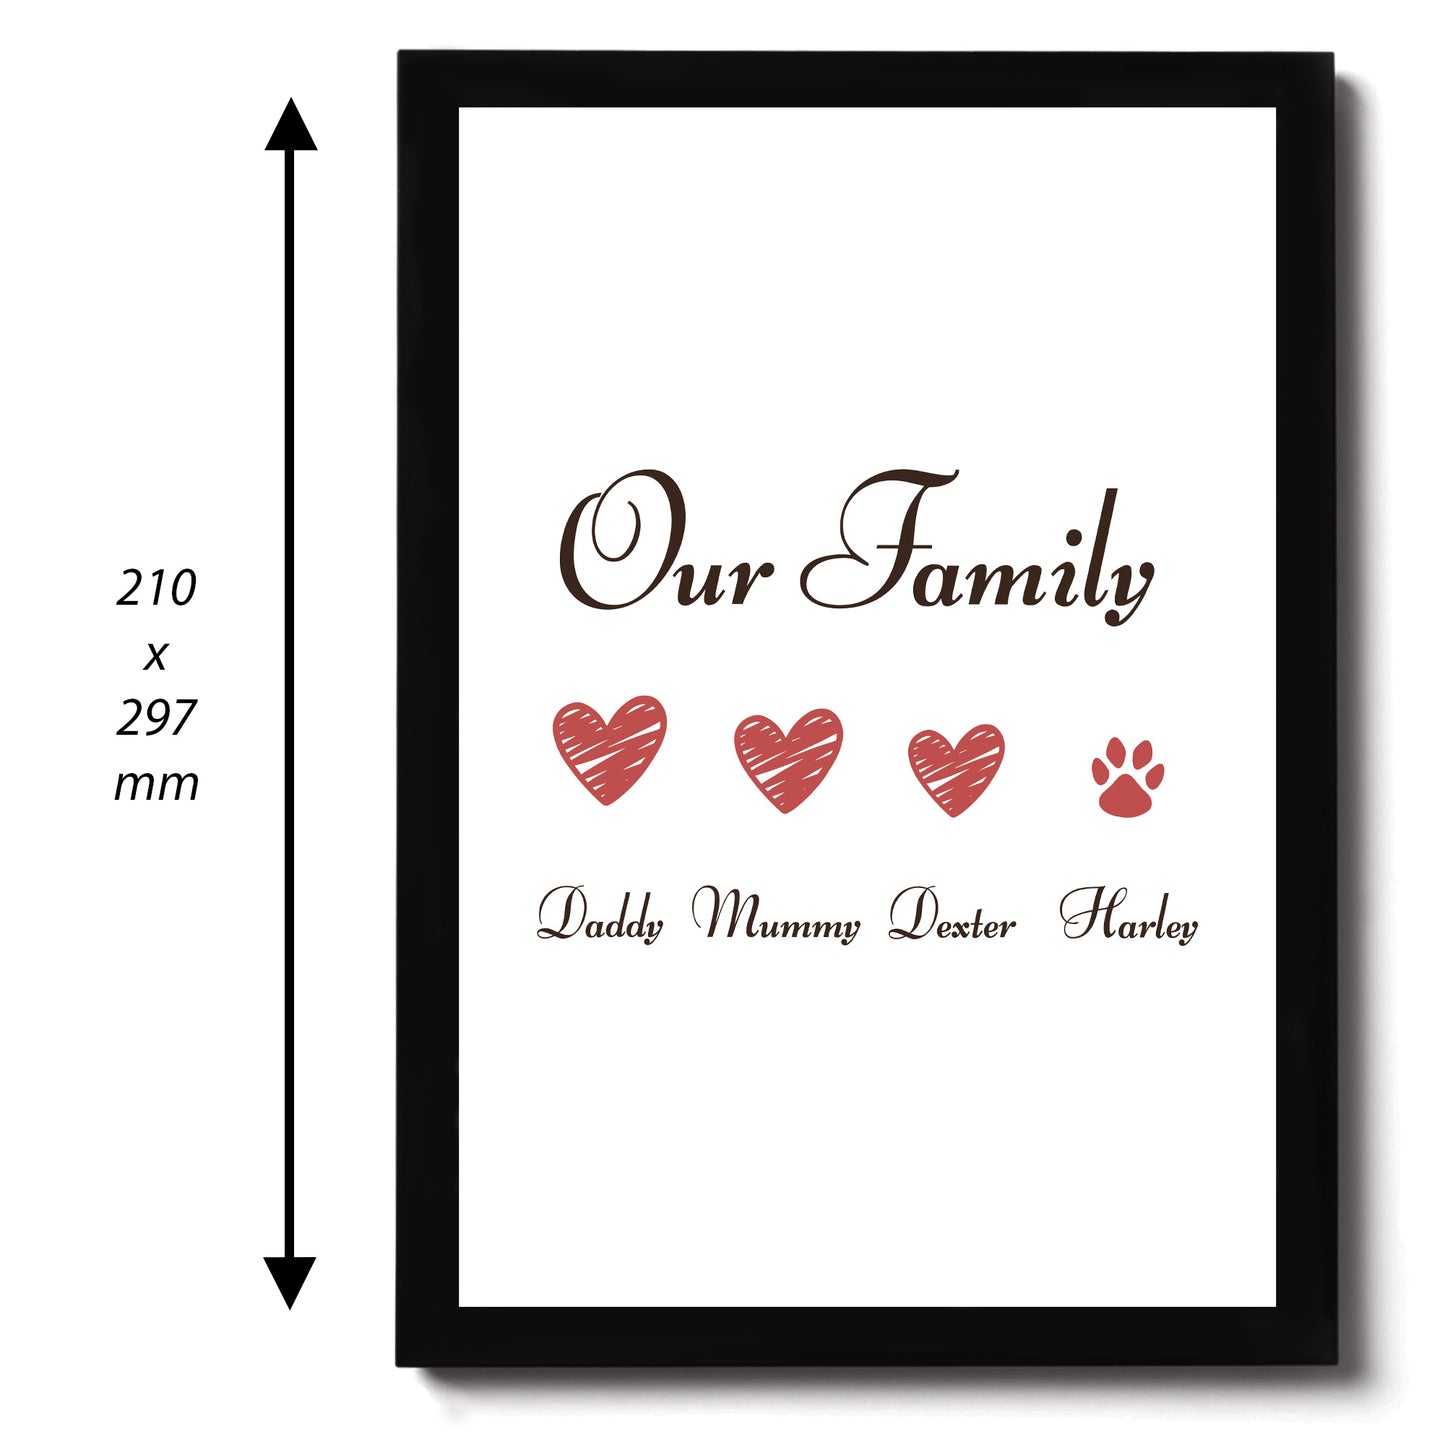 Personalised Sign For Family Home Sign Home Decor Couple Gift